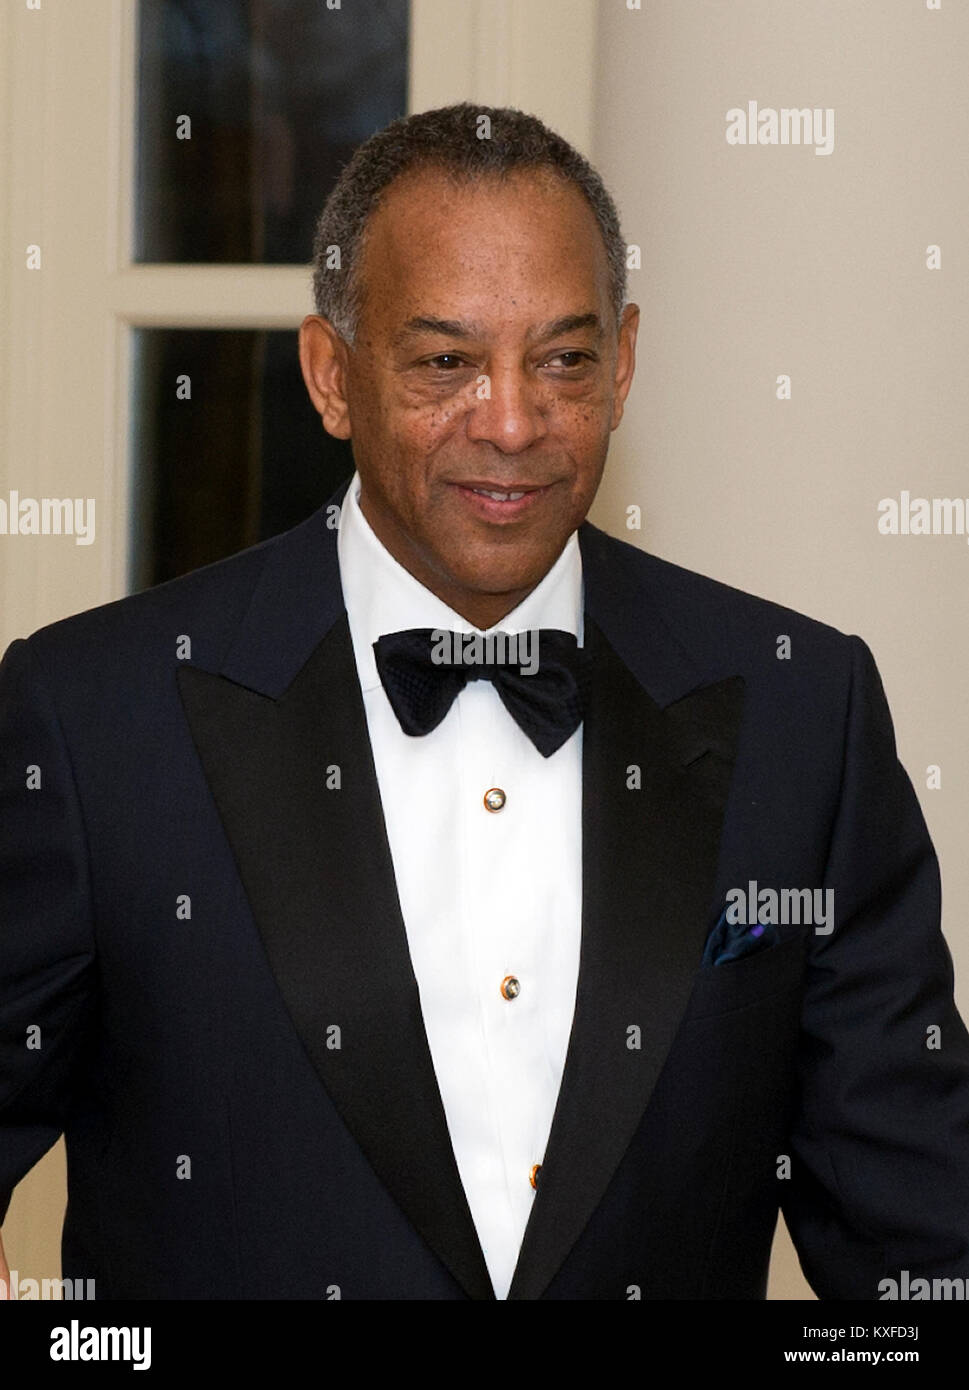 John W. Thompson, CEO of Virtual Instruments,  arrives for the Official Dinner in honor of Prime Minister David Cameron of Great Britain and his wife, Samantha, at the White House in Washington, D.C. on Tuesday, March 14, 2012. Mr. Thompson is one of United States President Barack Obama's biggest campaign fundraisers..Credit: Ron Sachs / CNP./ MediaPunch (RESTRICTION: NO New York or New Jersey Newspapers or newspapers within a 75 mile radius of New York City) Stock Photo